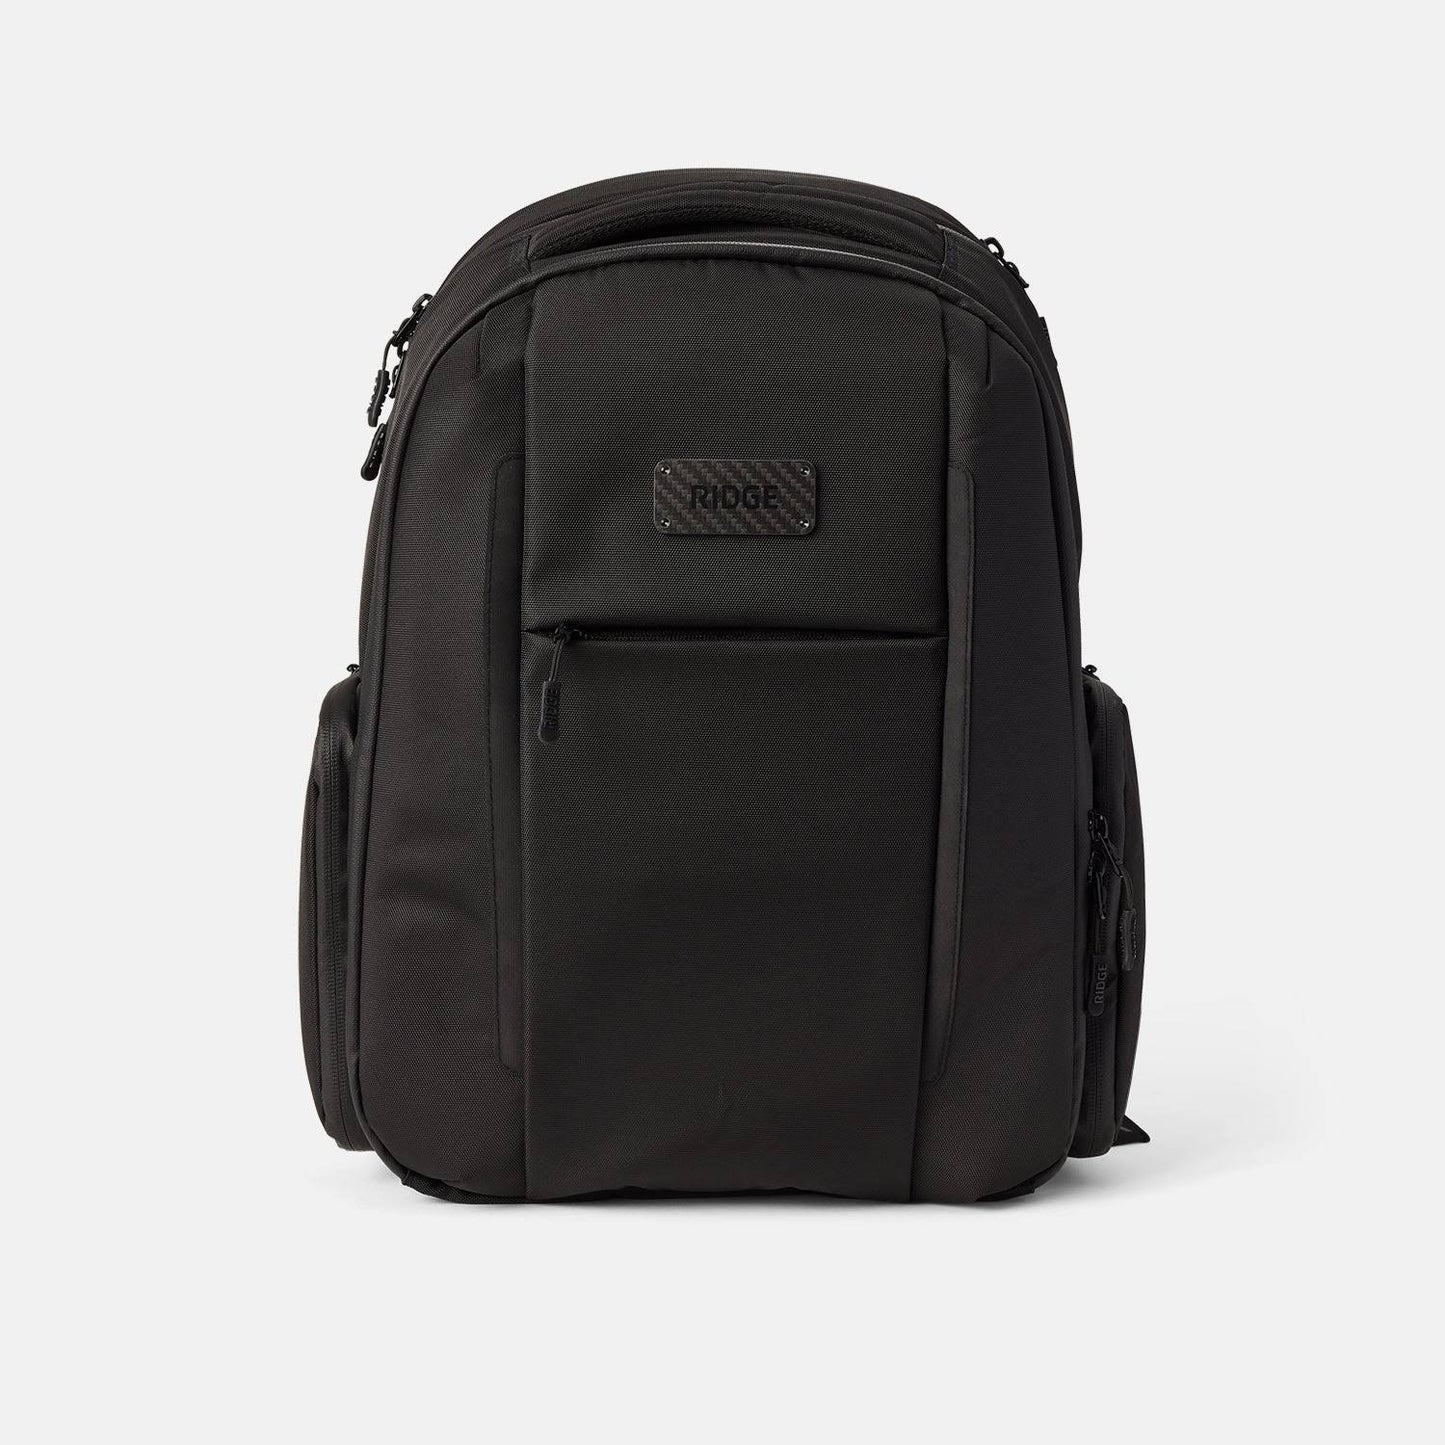 Commuter Backpack - Royal Black | 20 Liters | 18x12x7in | Weatherproof | Rfid Blocking Hidden Rear Pocket | Padded Tech Compartments |